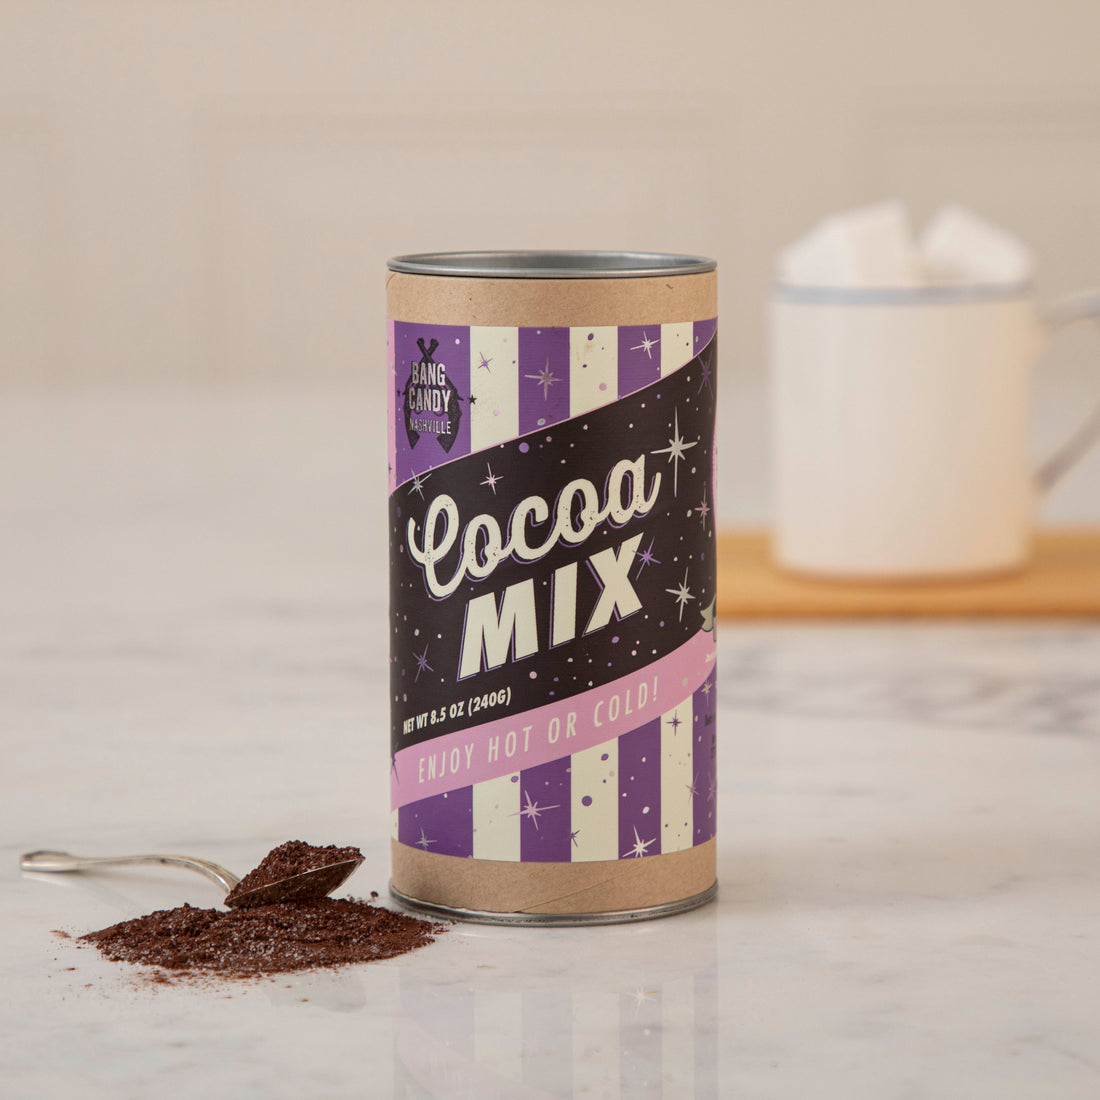 A tin of Bang Candy Cocoa Mix next to a cup of coffee.